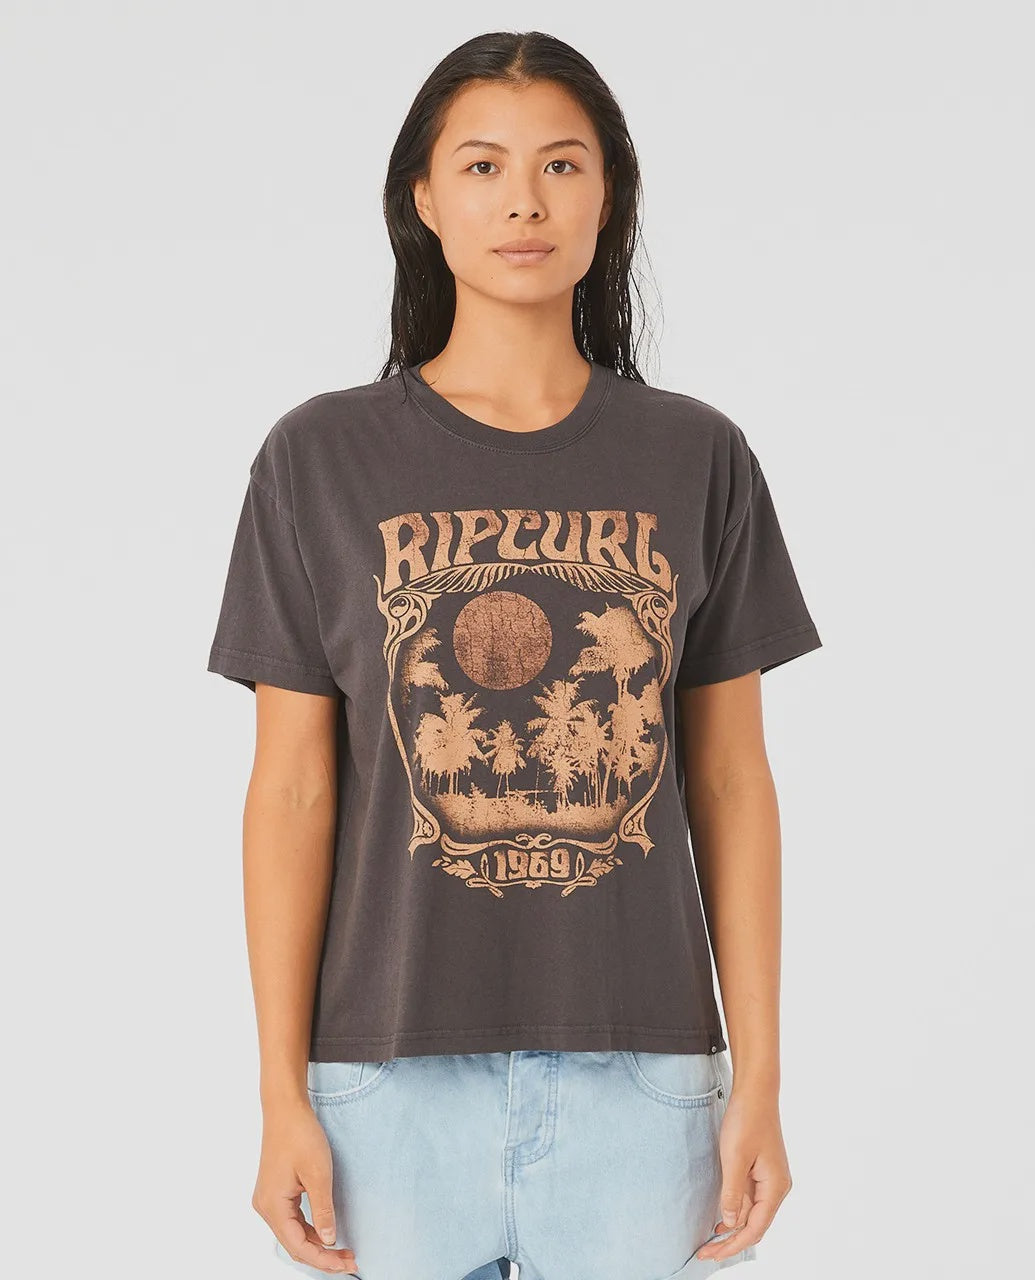 Higher Purpose Relaxed Tee